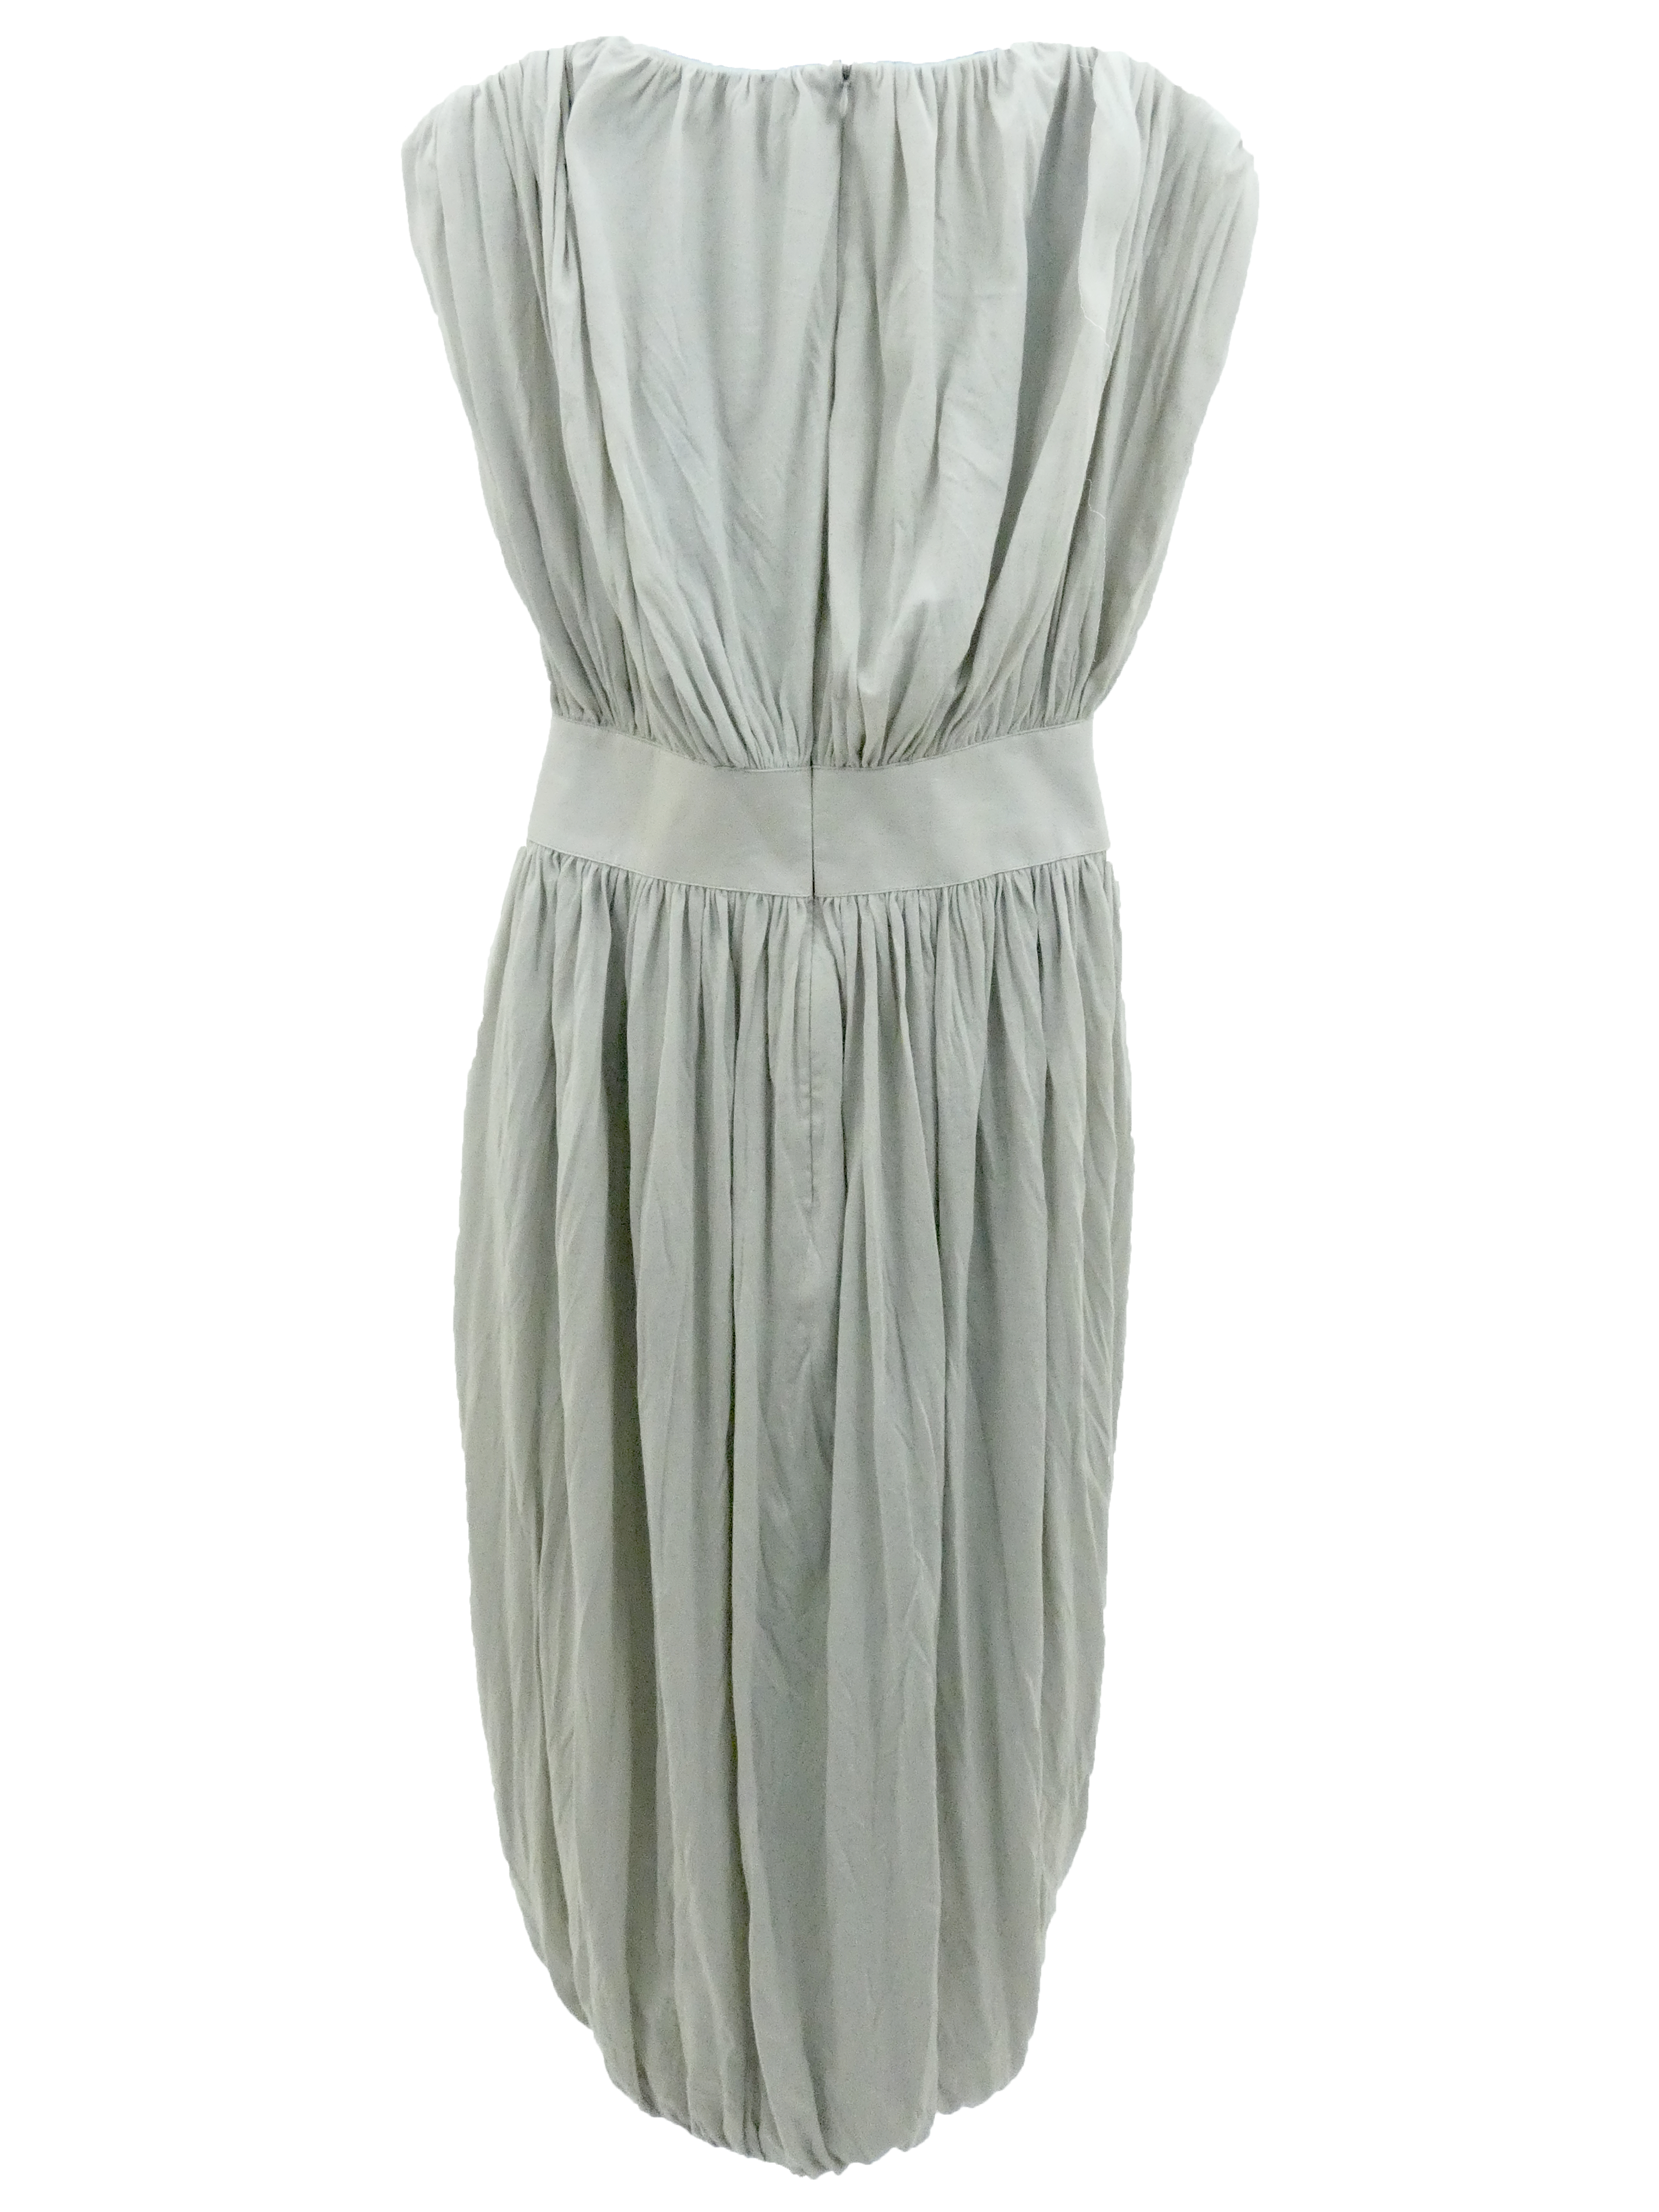 DEEP NECK RUCHED DRESS WITH LEATHER WAISTBAND IN GREIGE